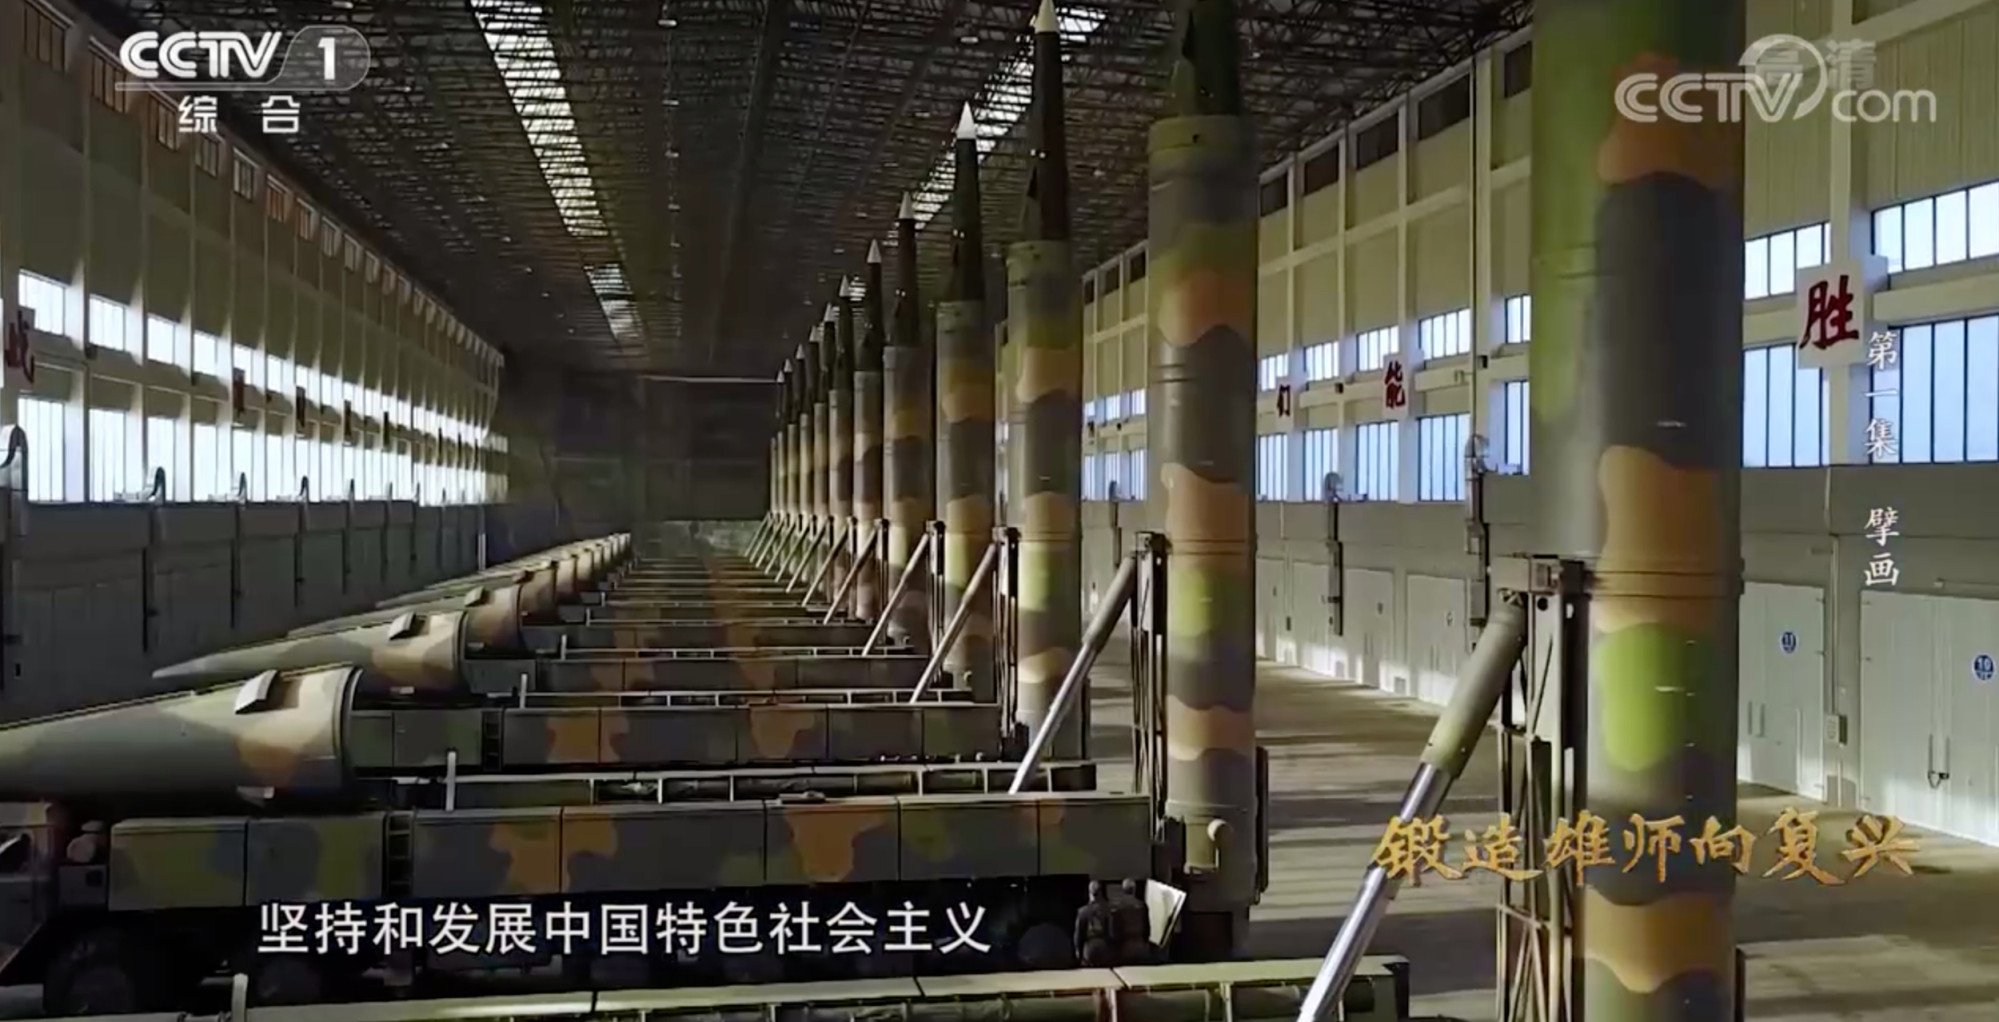 At least a dozen DF-26B missiles with launchers, as seen in the eight-part CCTV documentary series. Photo: CCTV